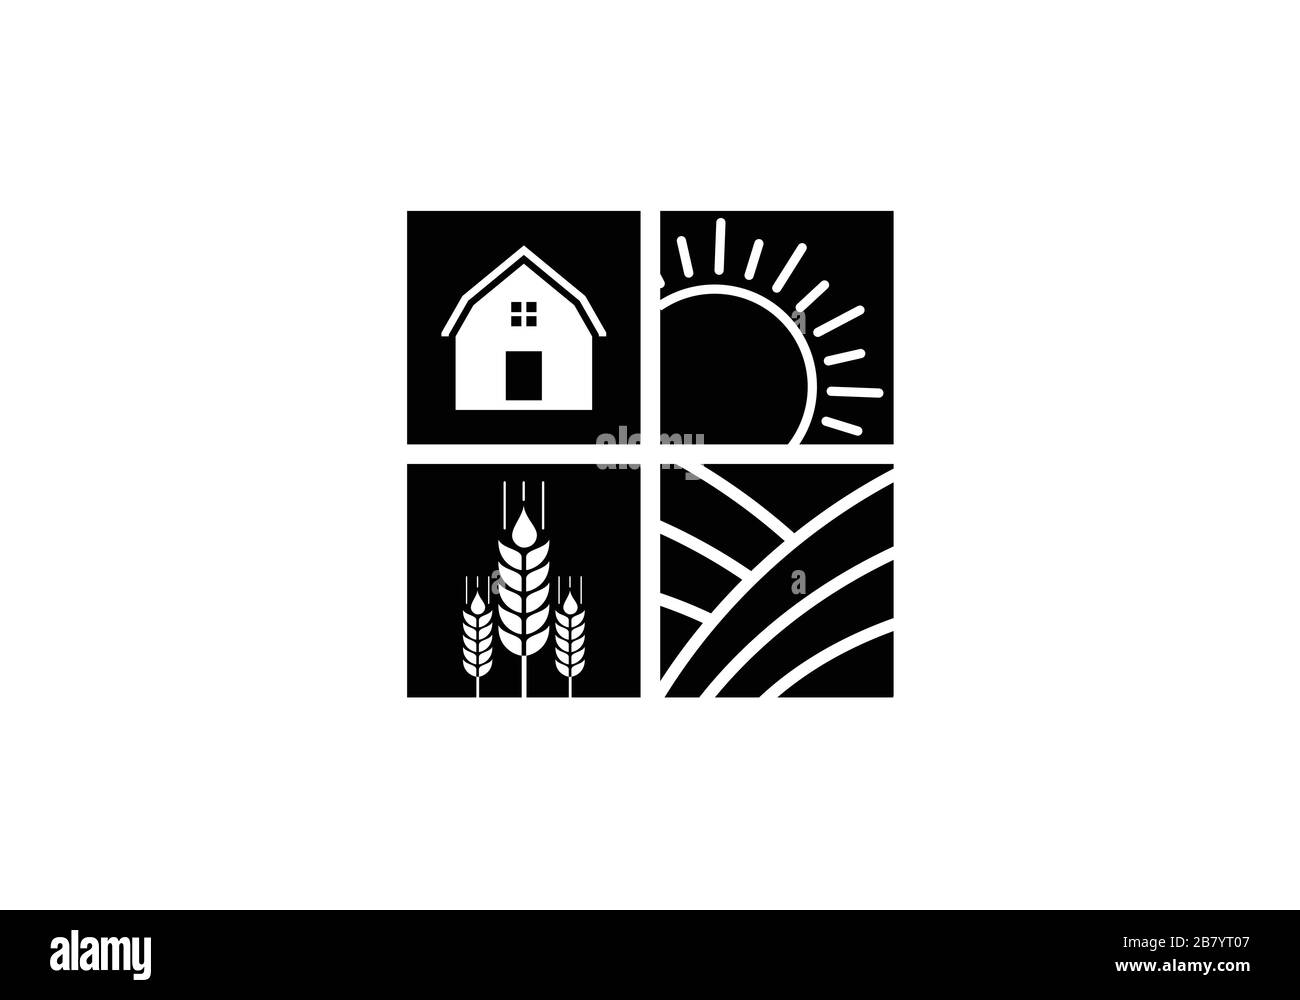 Farm House concept logo. Label for natural farm products. Black logotype isolated on white background. Stock Vector